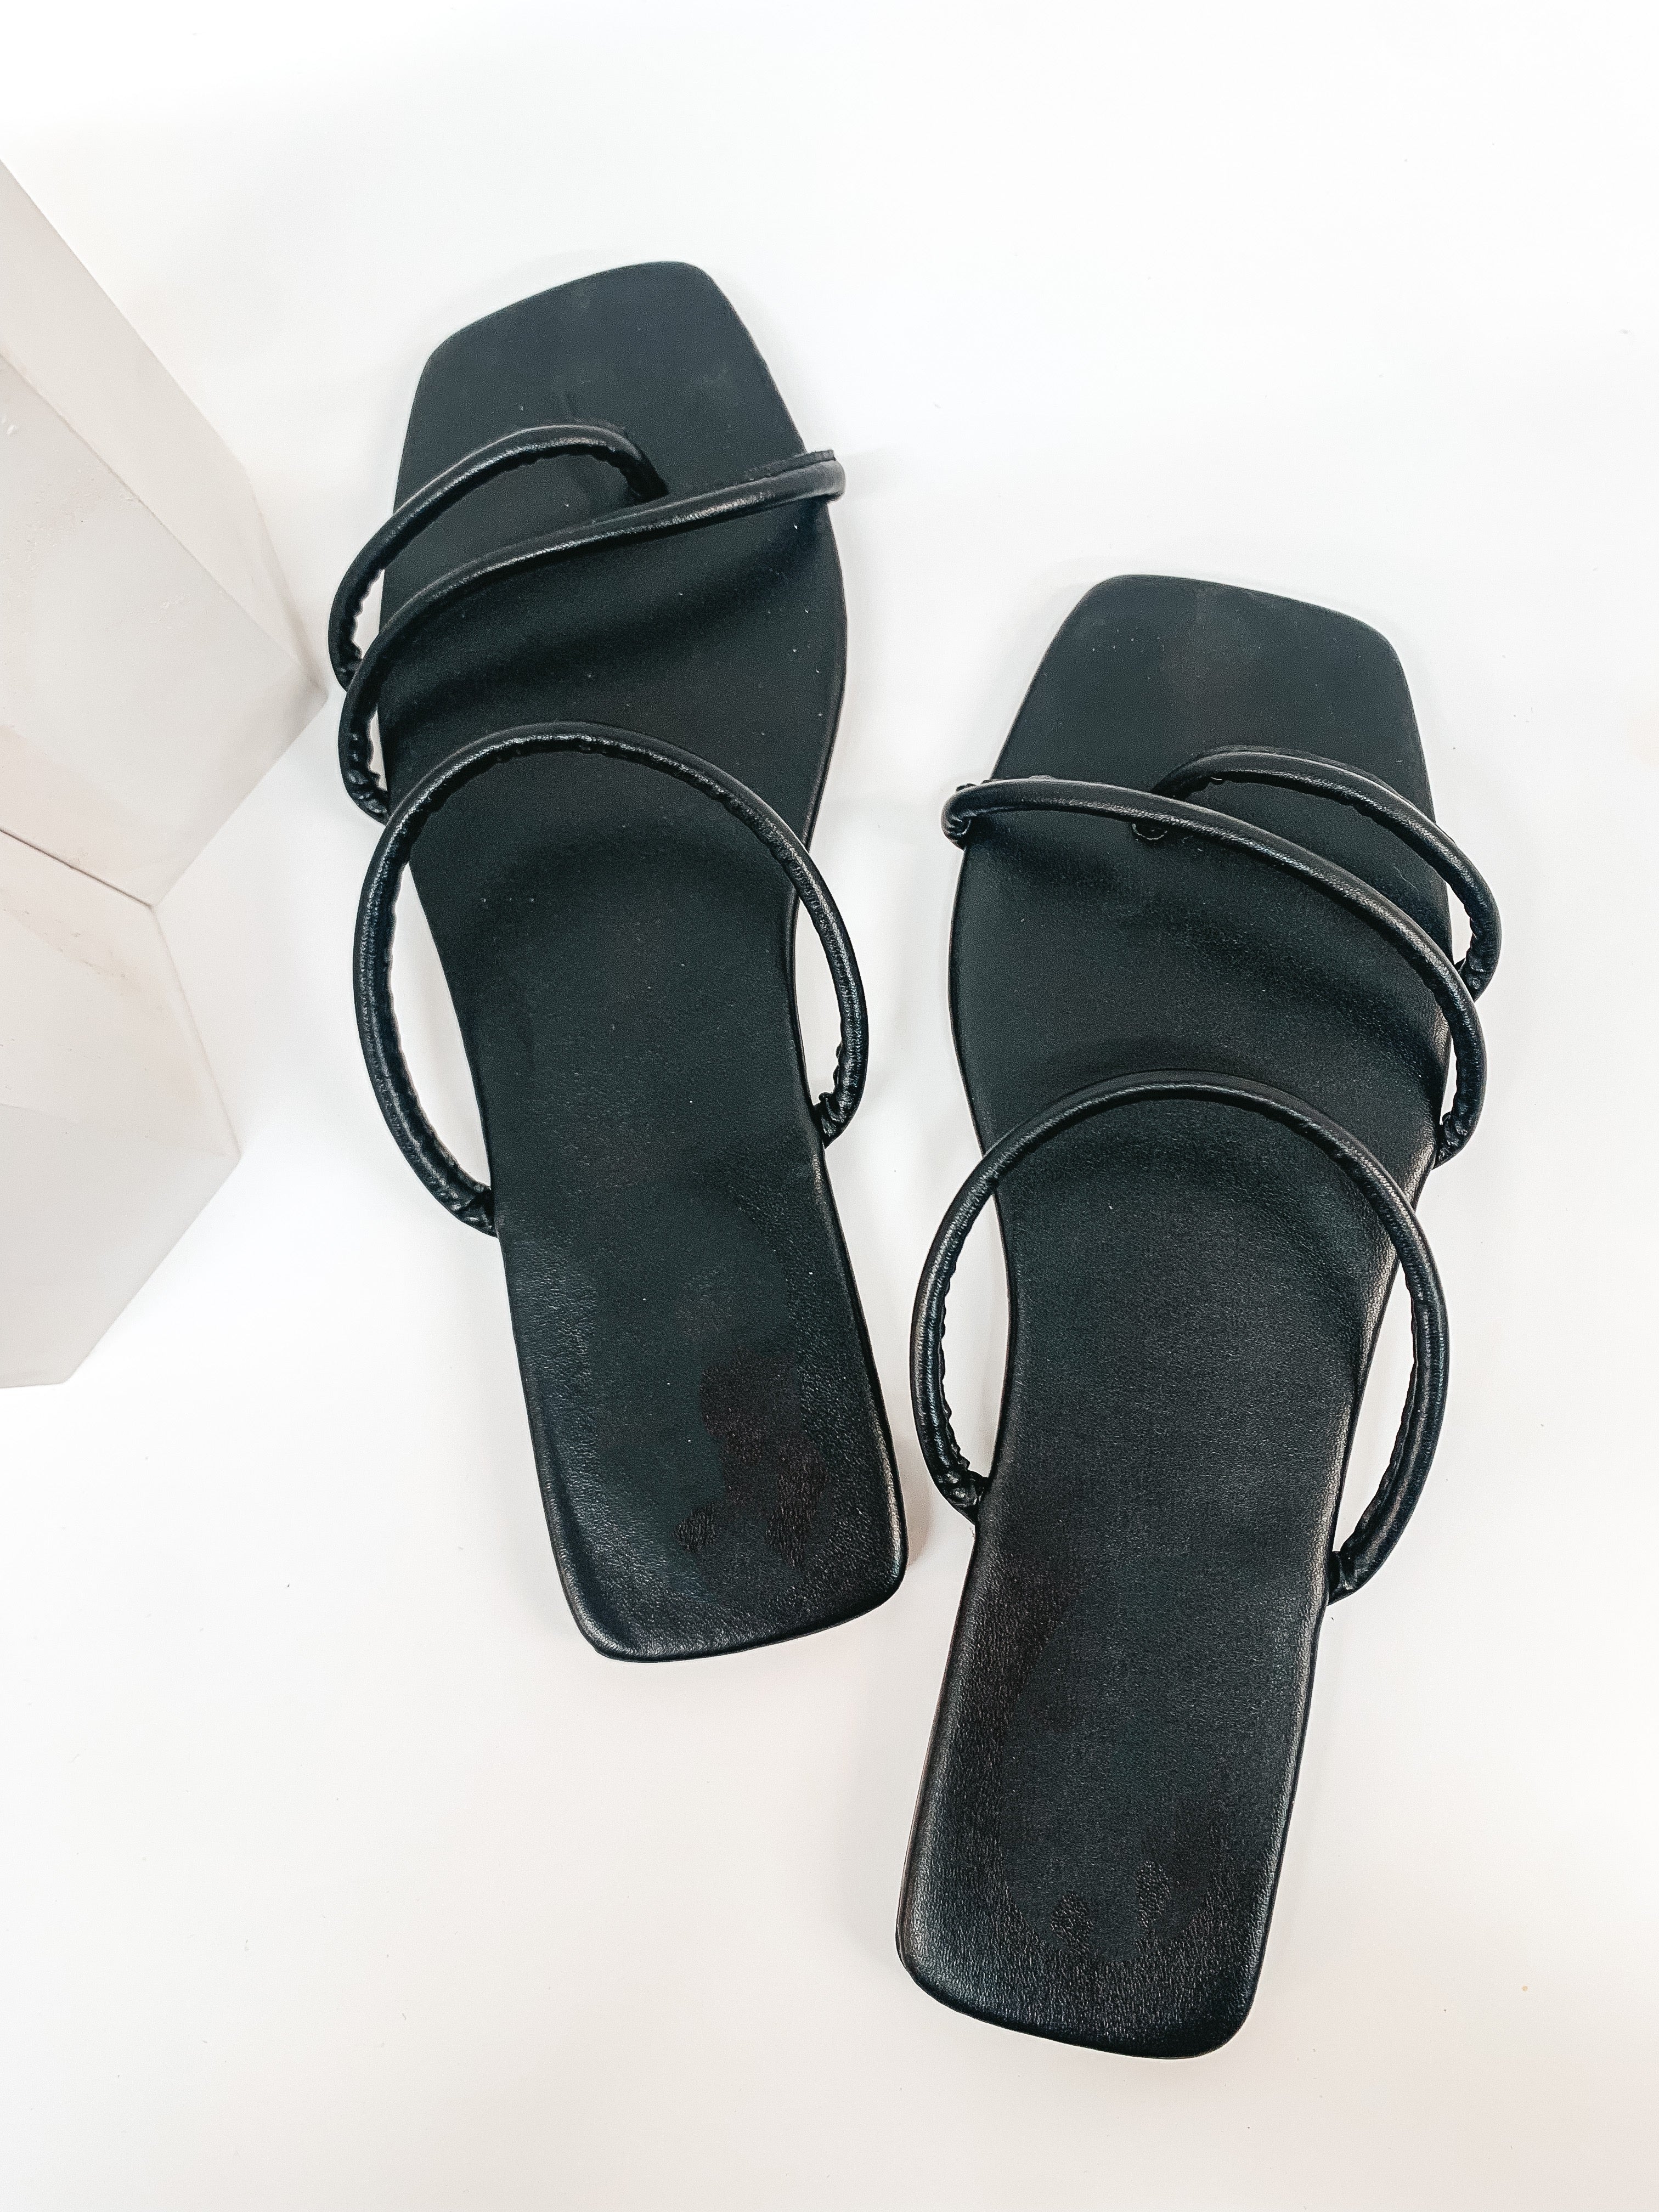 Strut Sis Strappy Square Toe Flat Sandals in Black - Giddy Up Glamour Boutique